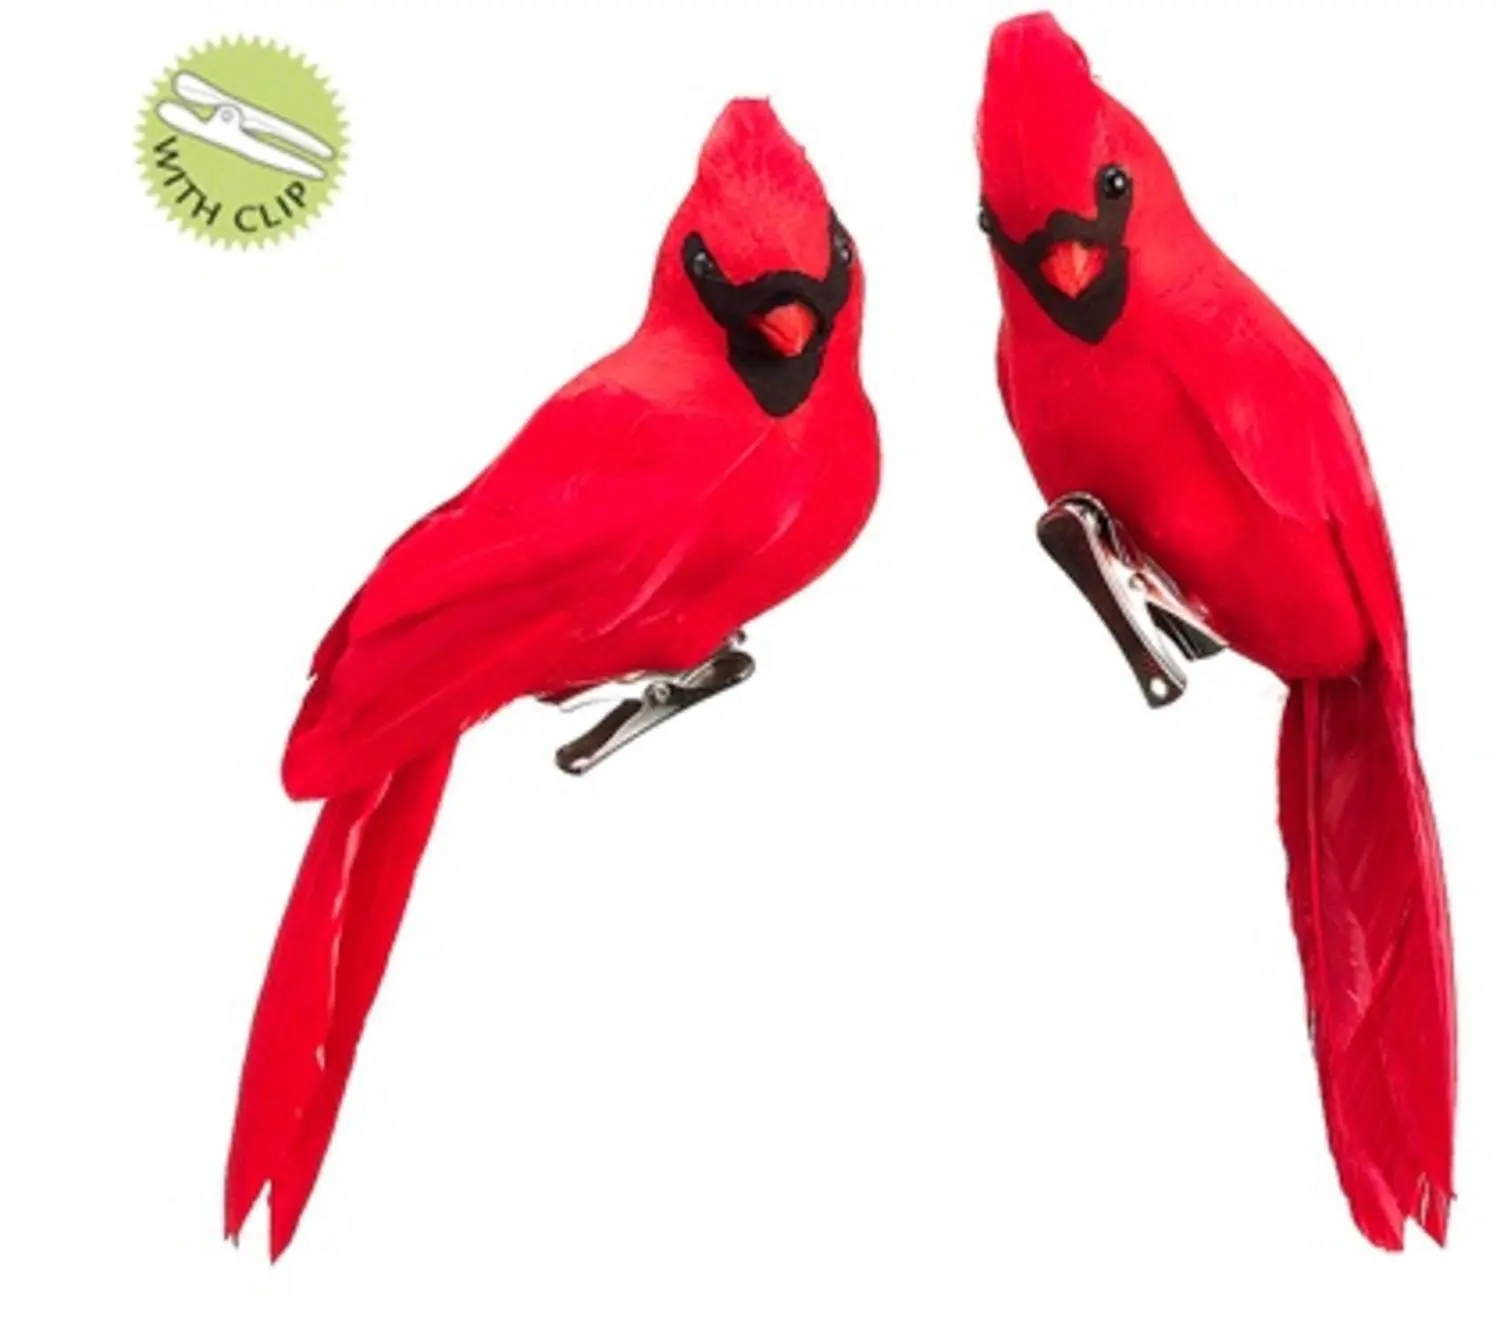 Cheap Red Bird Ornaments, find Red Bird Ornaments deals on line at